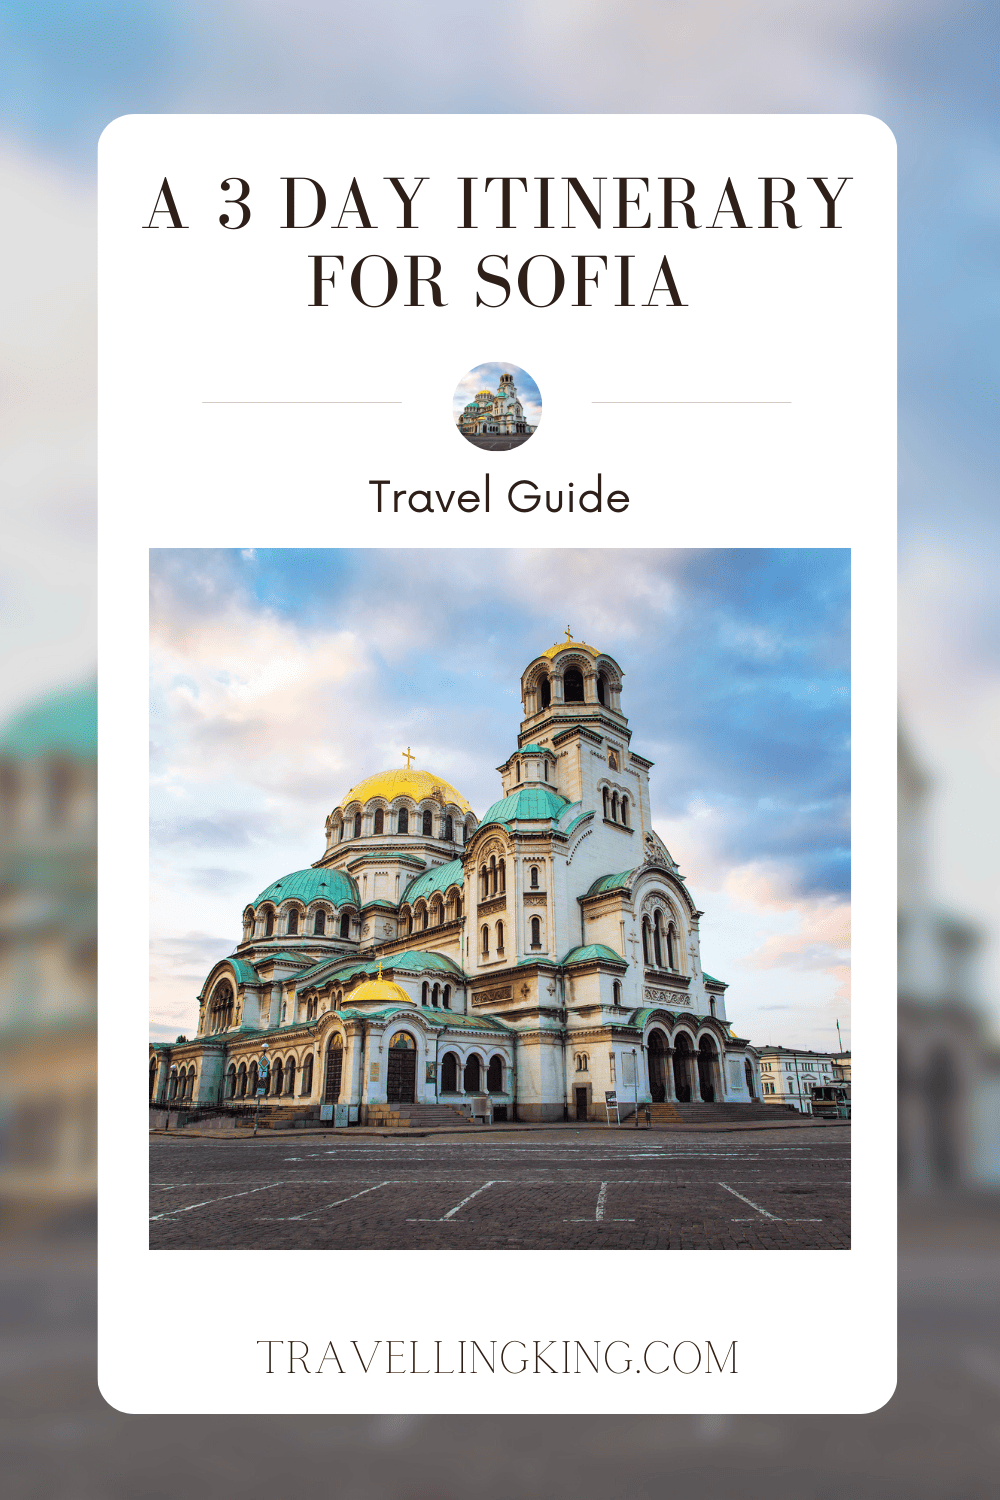 A 3 day Itinerary for Sofia